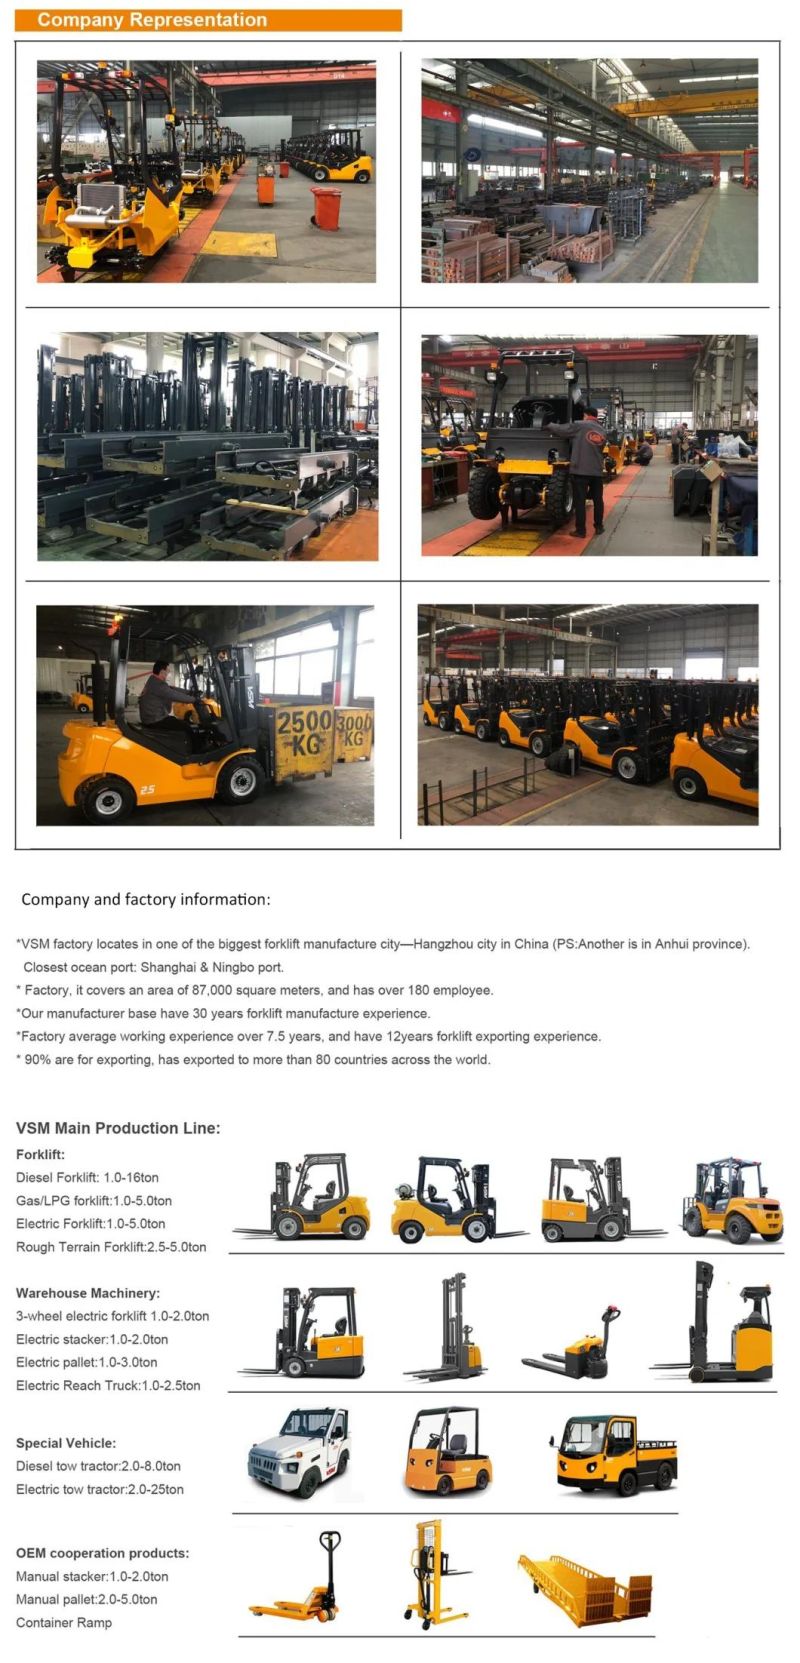 Fd100 Cpcd100 10ton Diesel Forklift with Ce/ISO